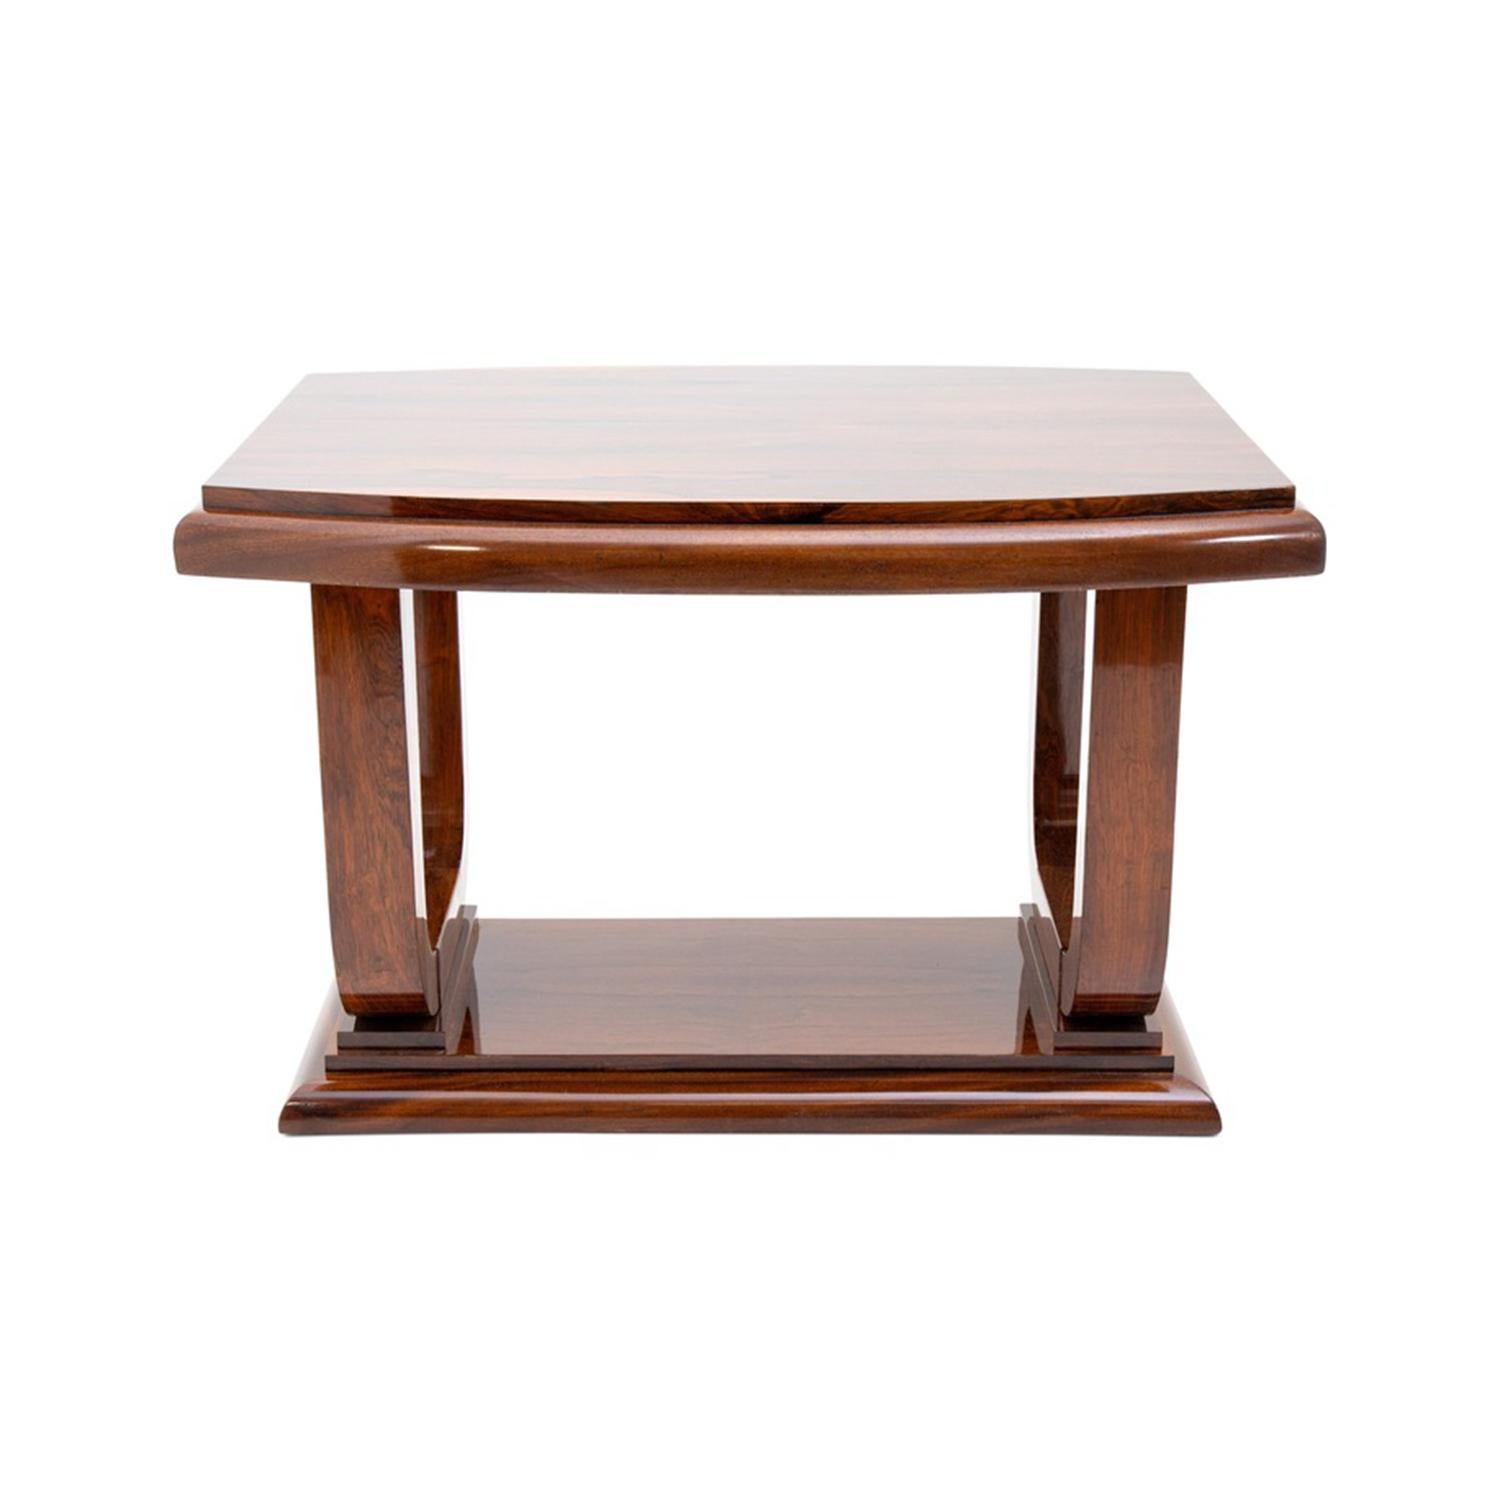 A dark-brown, vintage Art Deco French freestanding console, end table made of hand crafted polished, partly veneered Mahogany in good condition. The Parisian rectangular polished center table is supported by two wide arched legs, resting on a thick